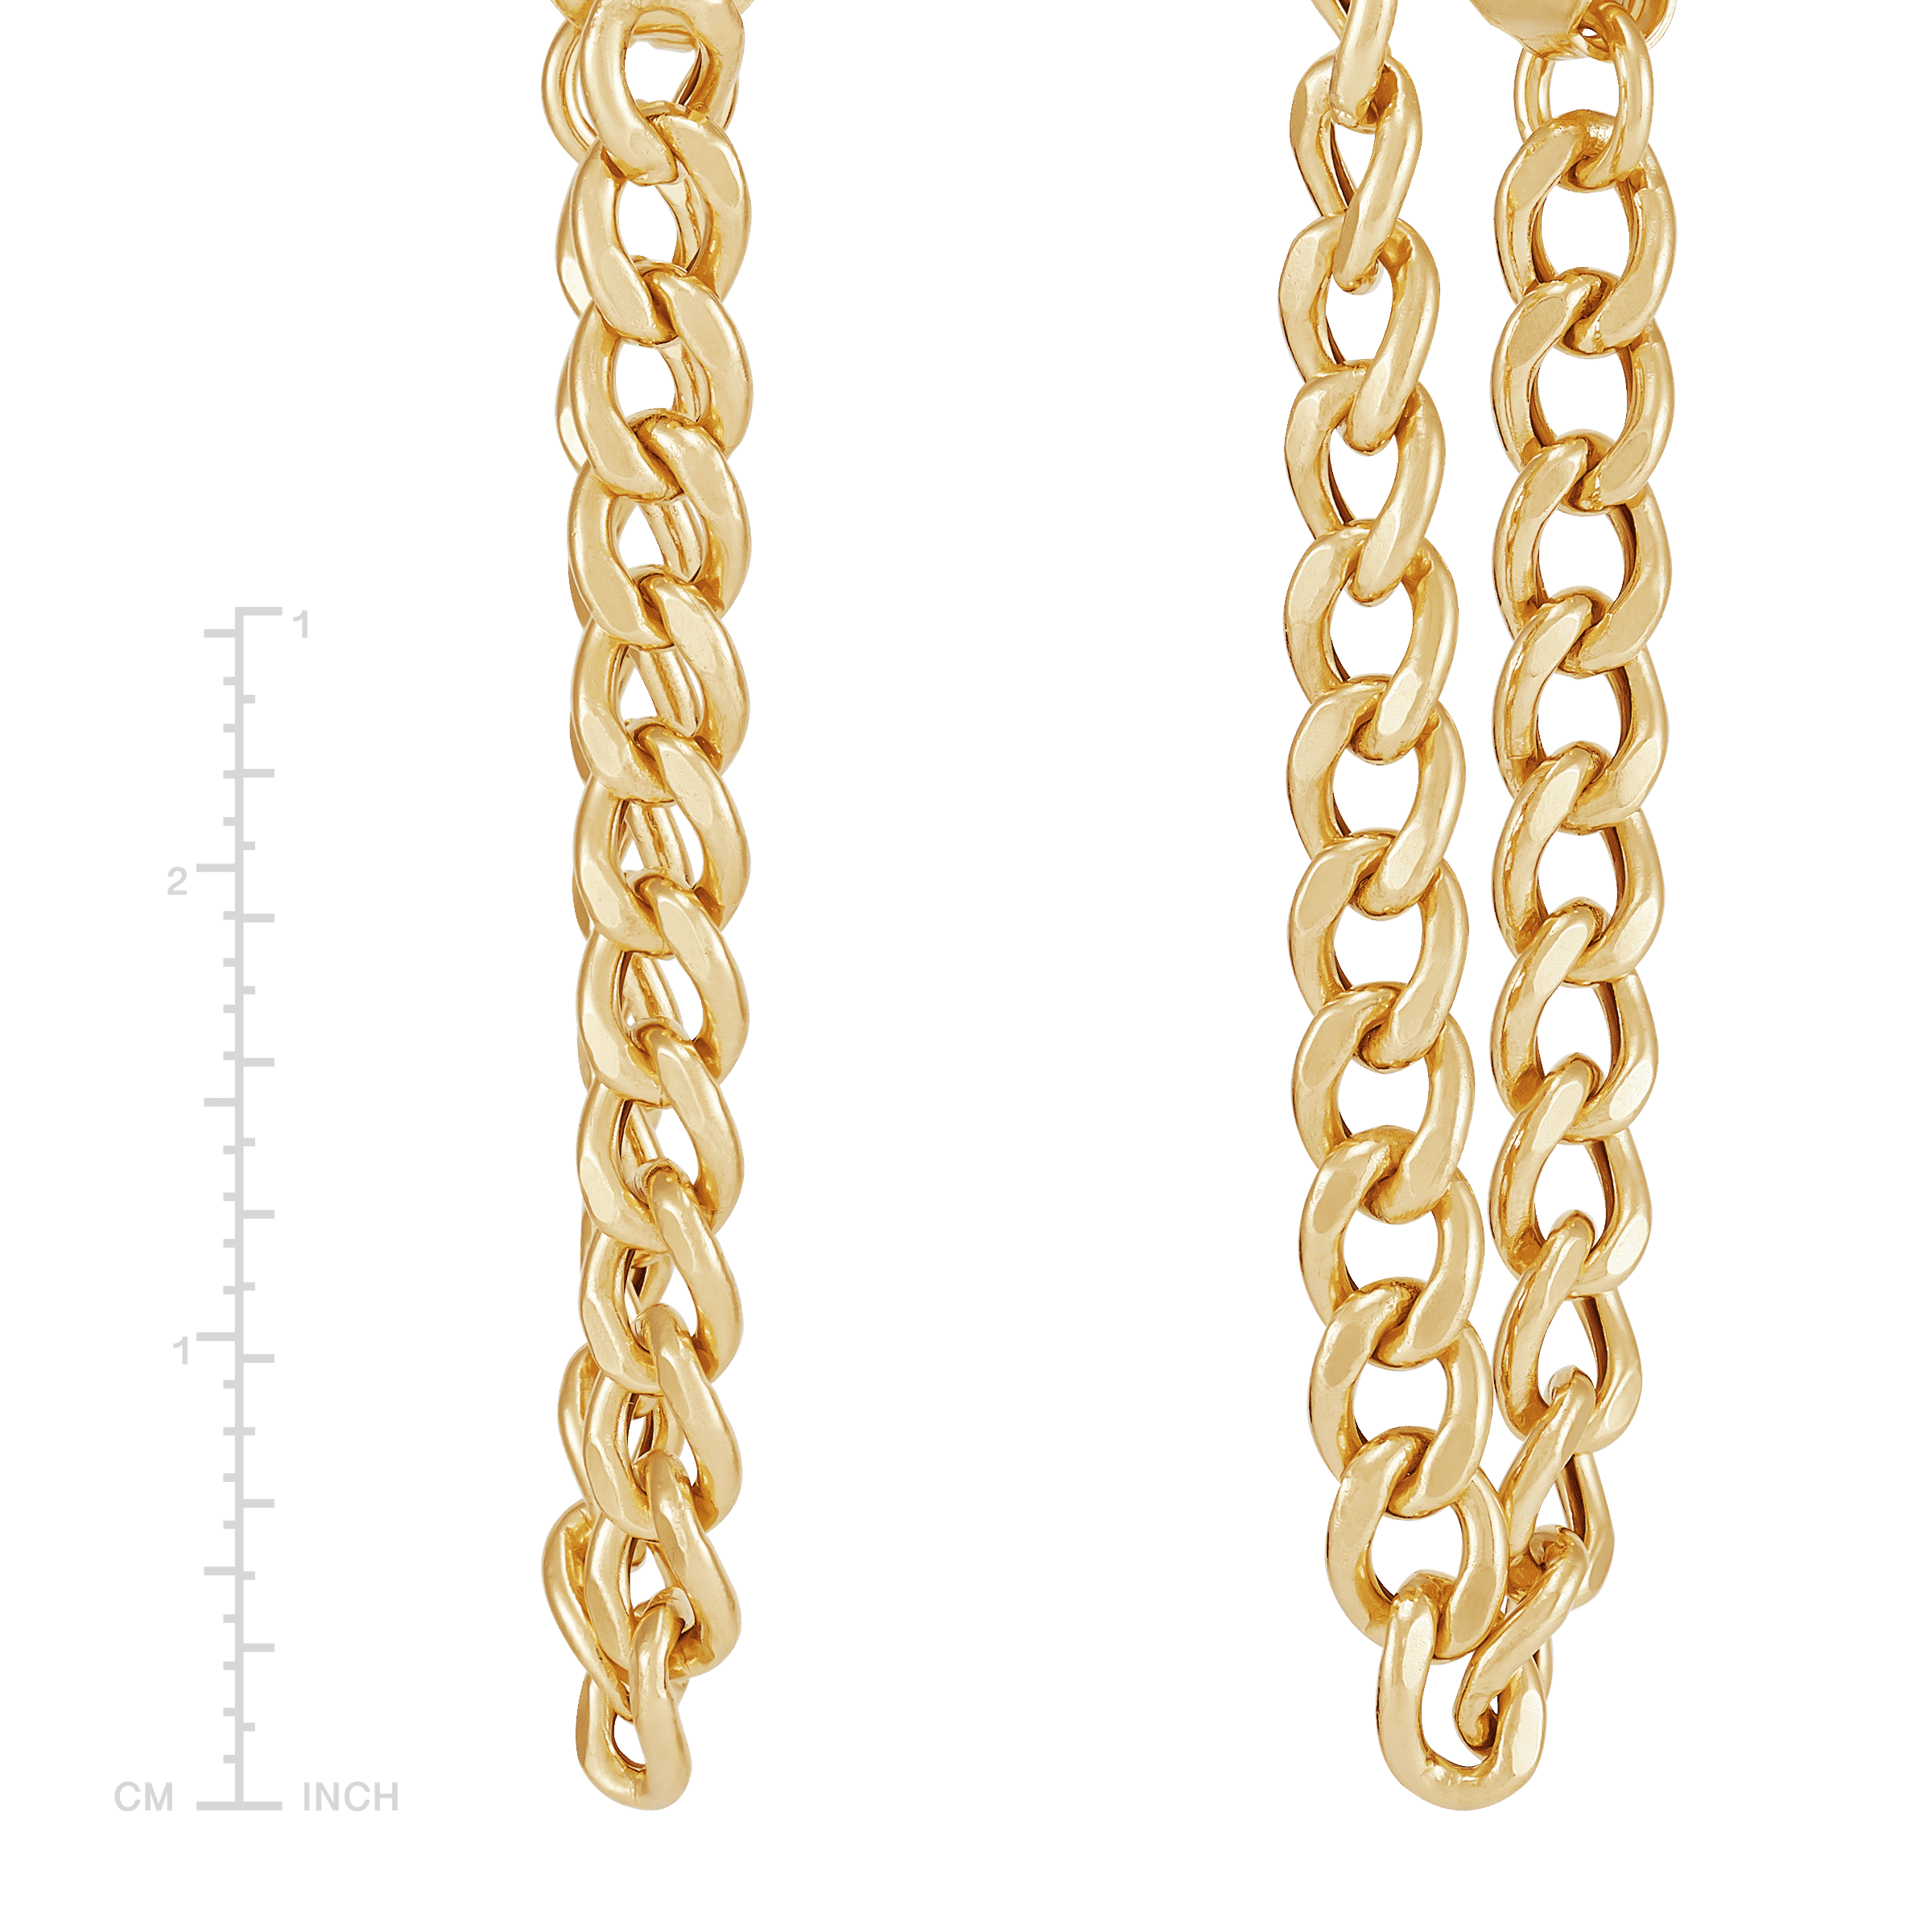 Welry Front and Back 3.7mm Curb Chain Earrings in 14K Gold-Plated